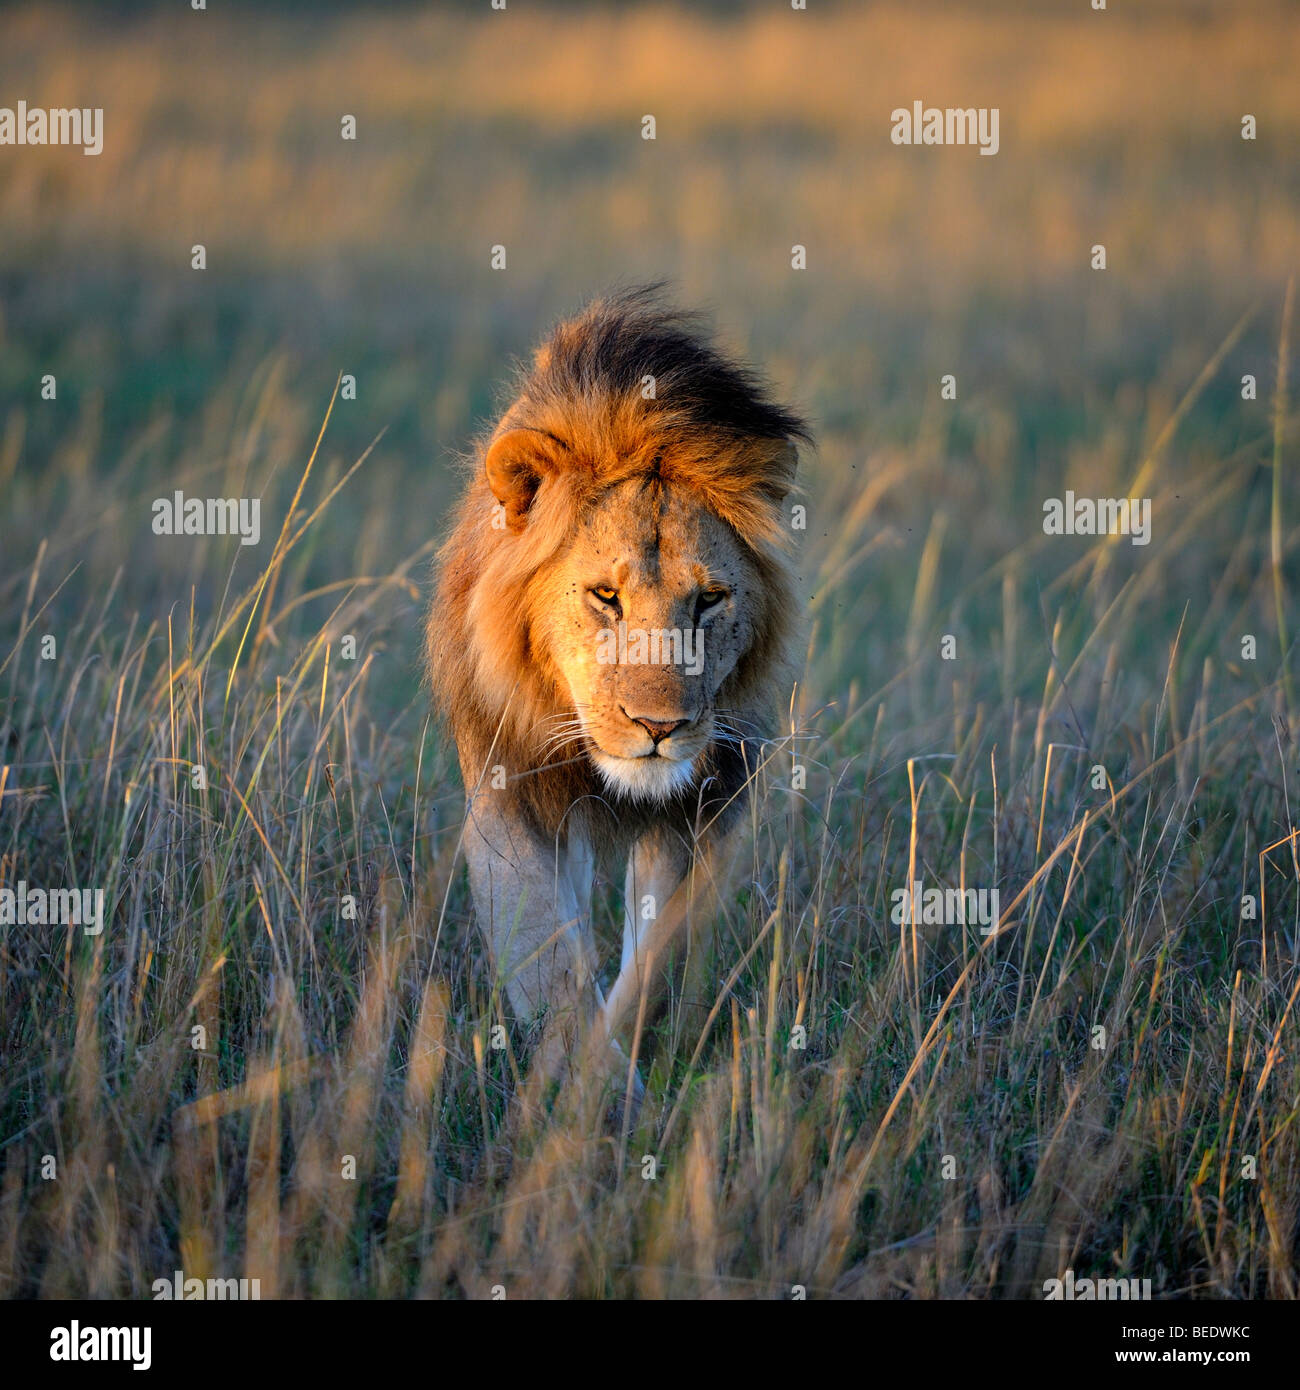 Lion (Panthera leo) with a mane in the first morning light, Masai Mara Nature Reserve, Kenya, East Africa Stock Photo